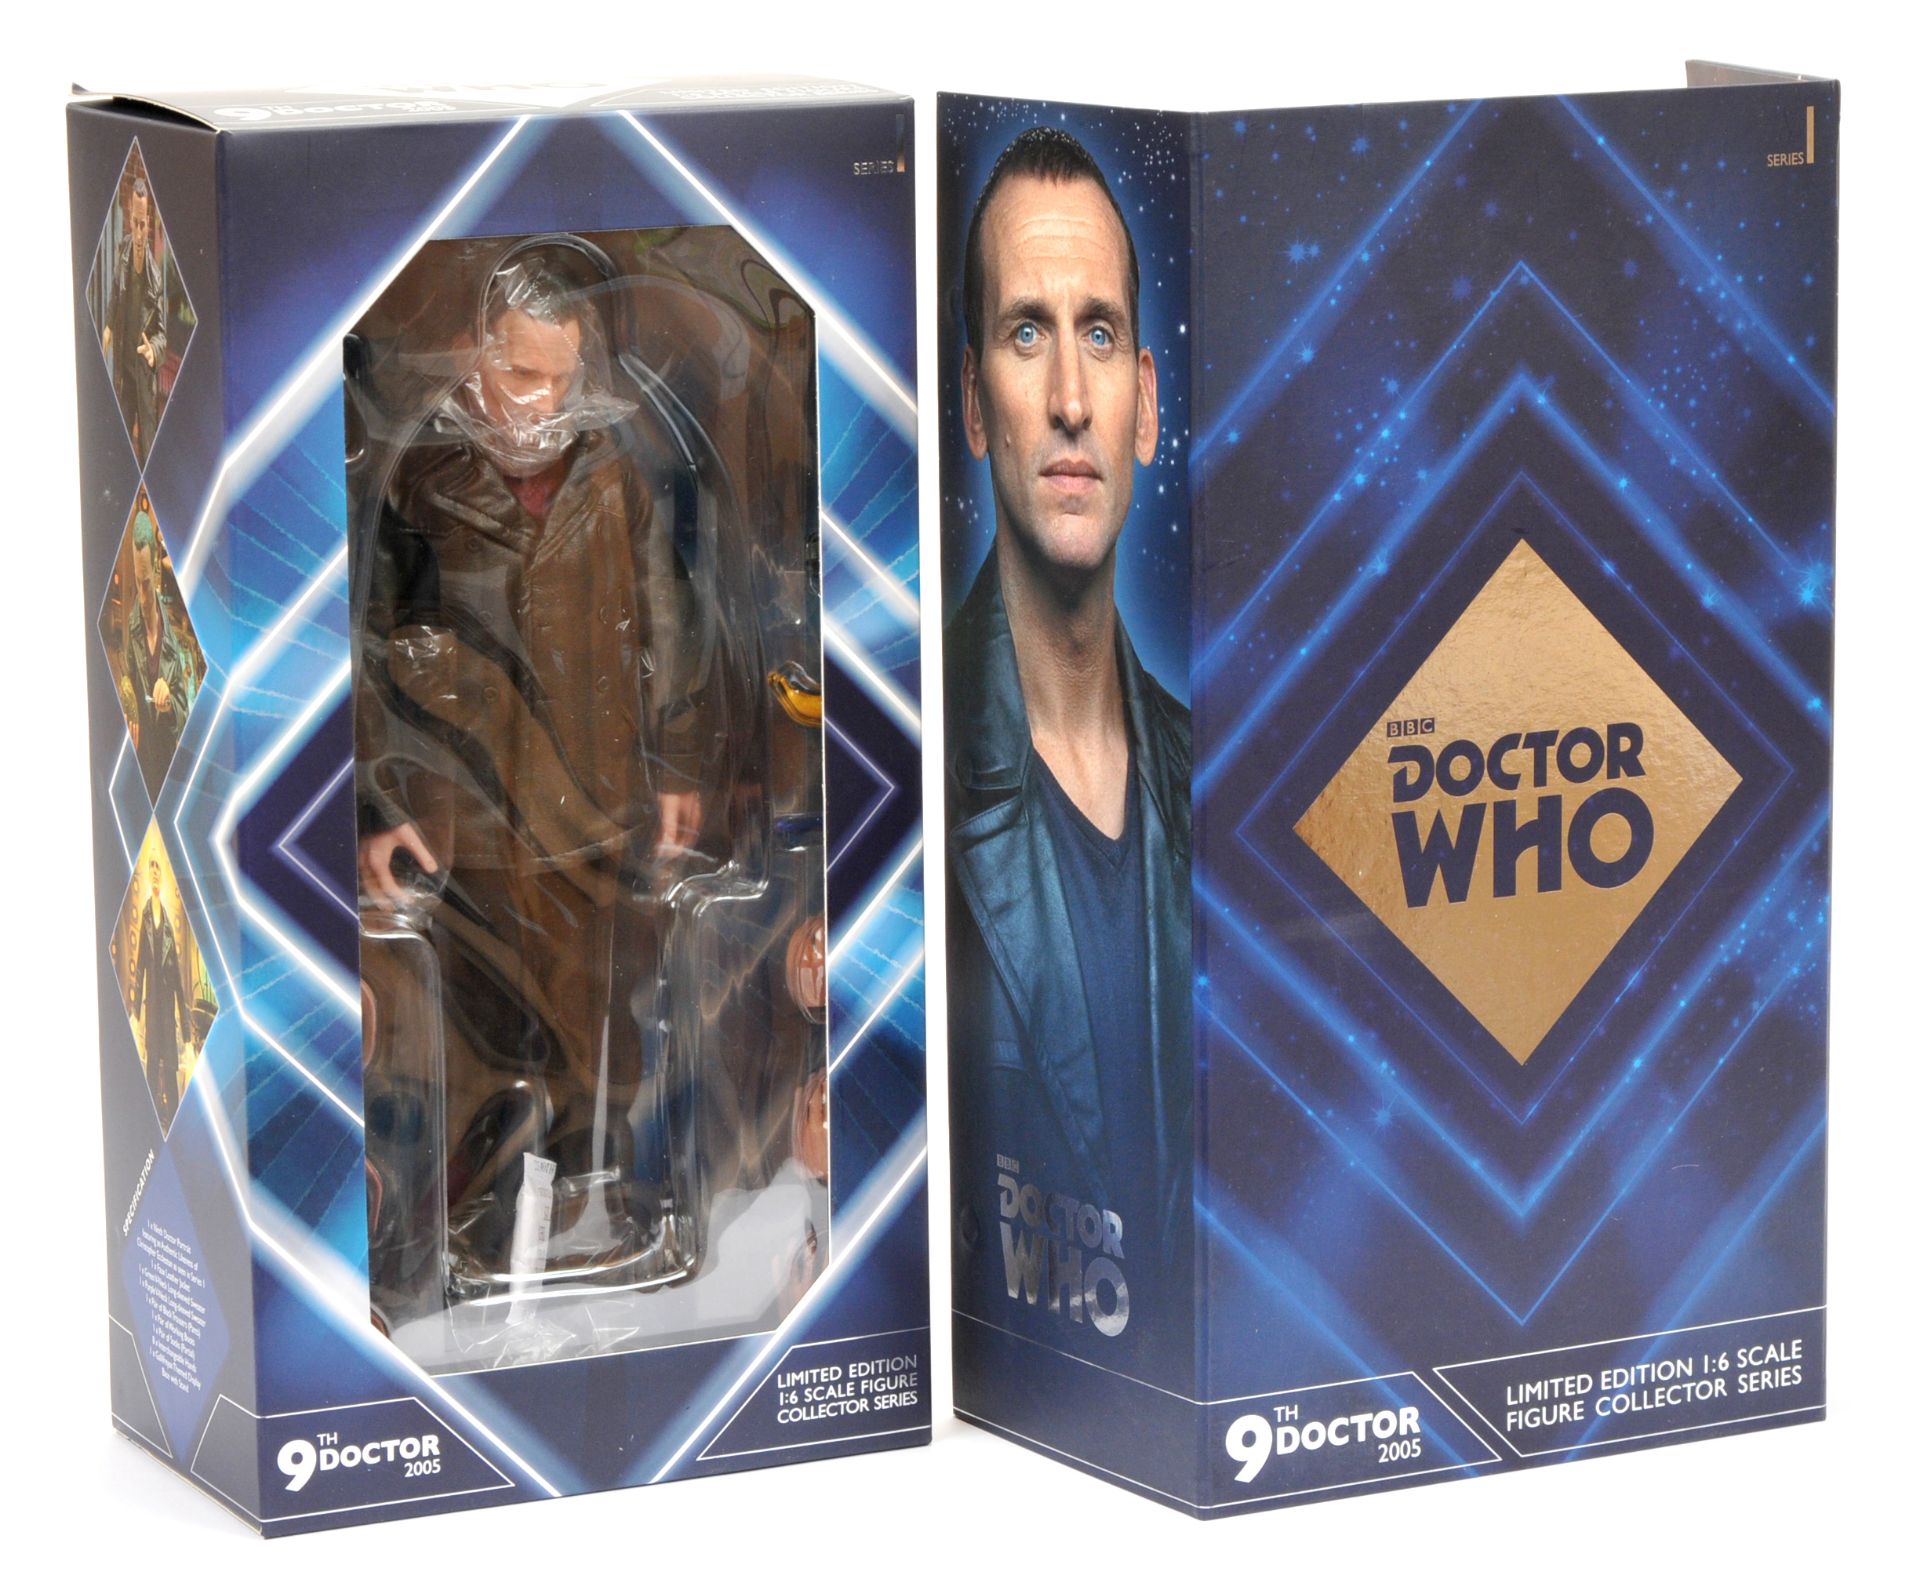 Big Chief Studios 50th Anniversary Doctor Who Collectors Series 9th Doctor